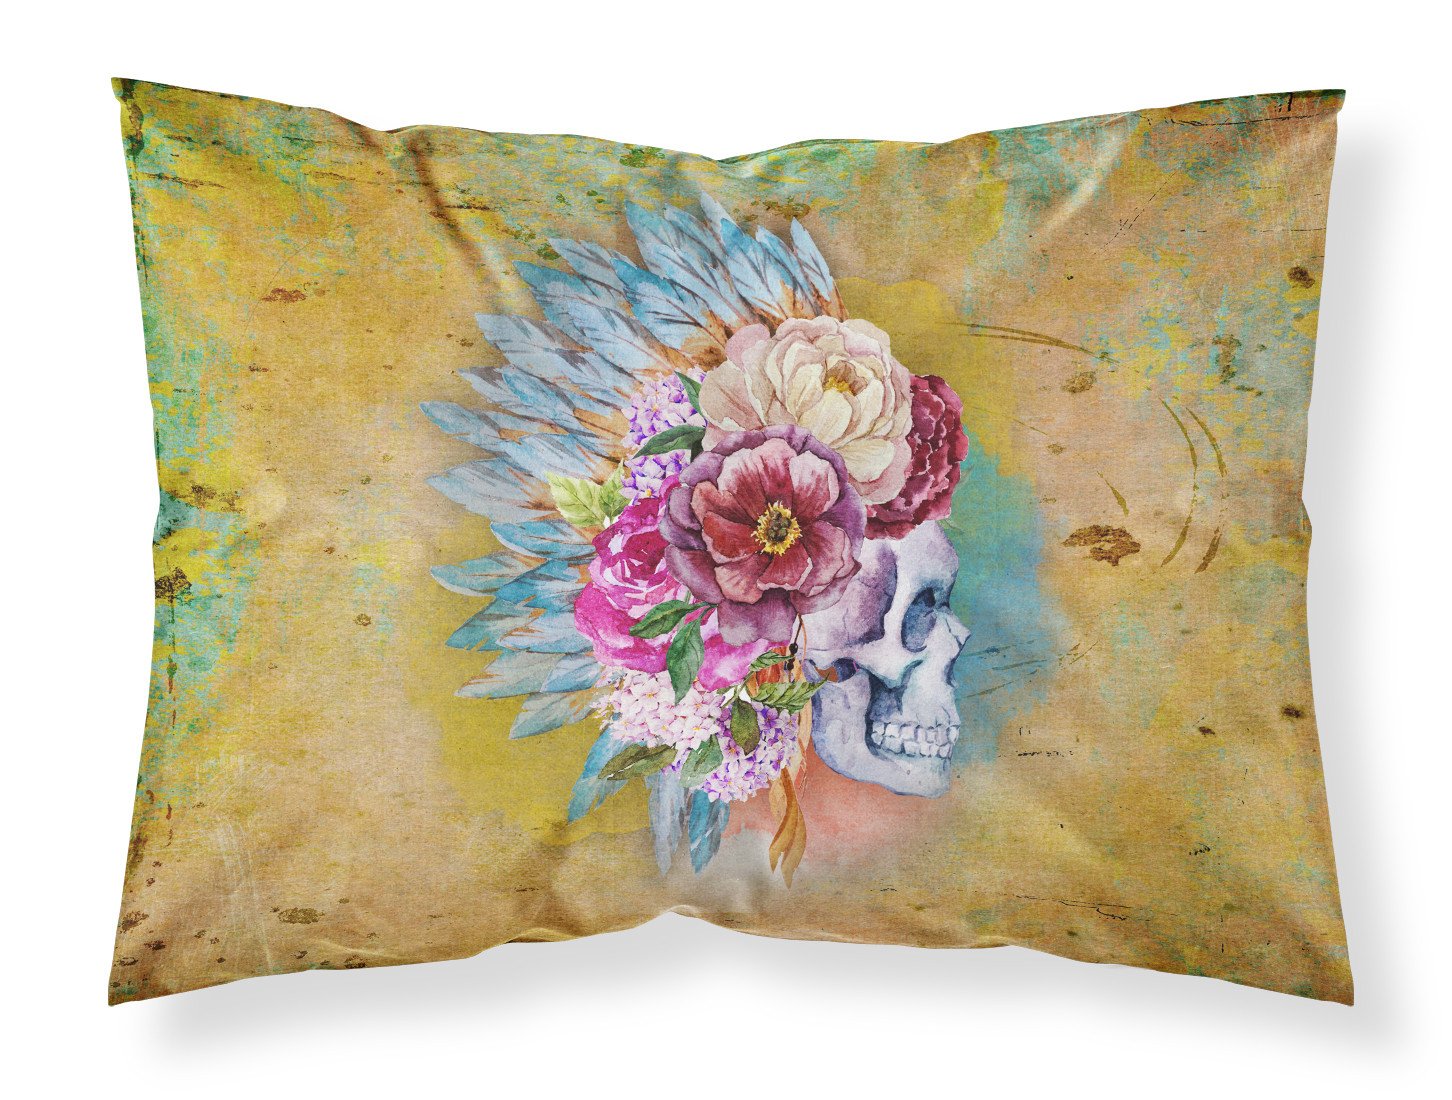 Day of the Dead Flowers Skull  Fabric Standard Pillowcase BB5129PILLOWCASE by Caroline's Treasures